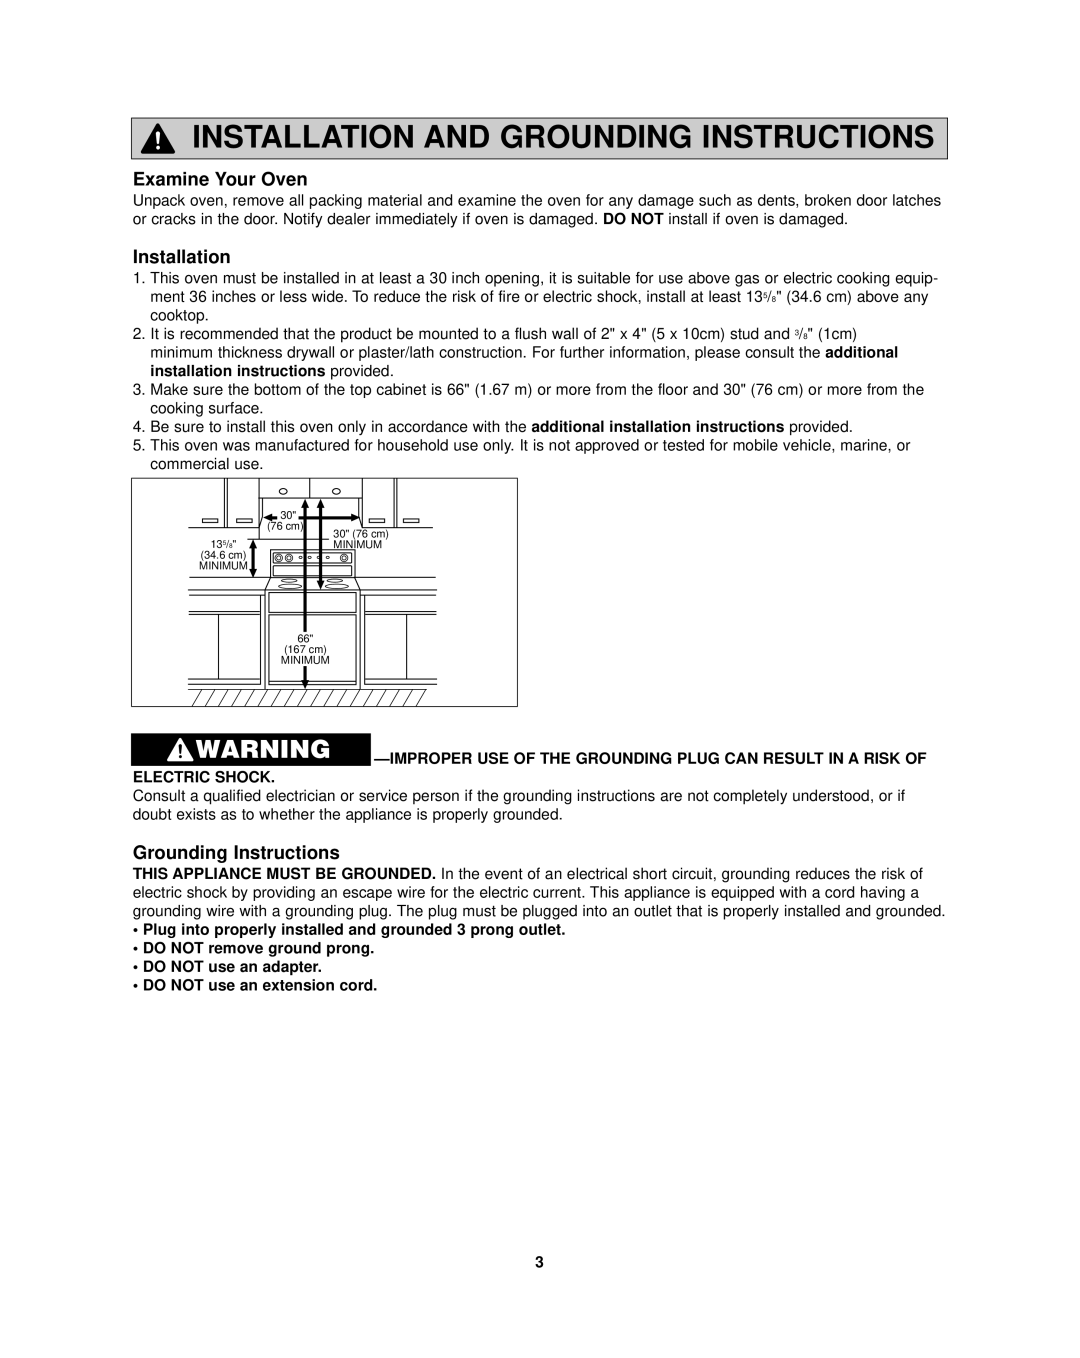 Panasonic NN-SD297SR Installation And Grounding Instructions, Examine Your Oven, Electric Shock 